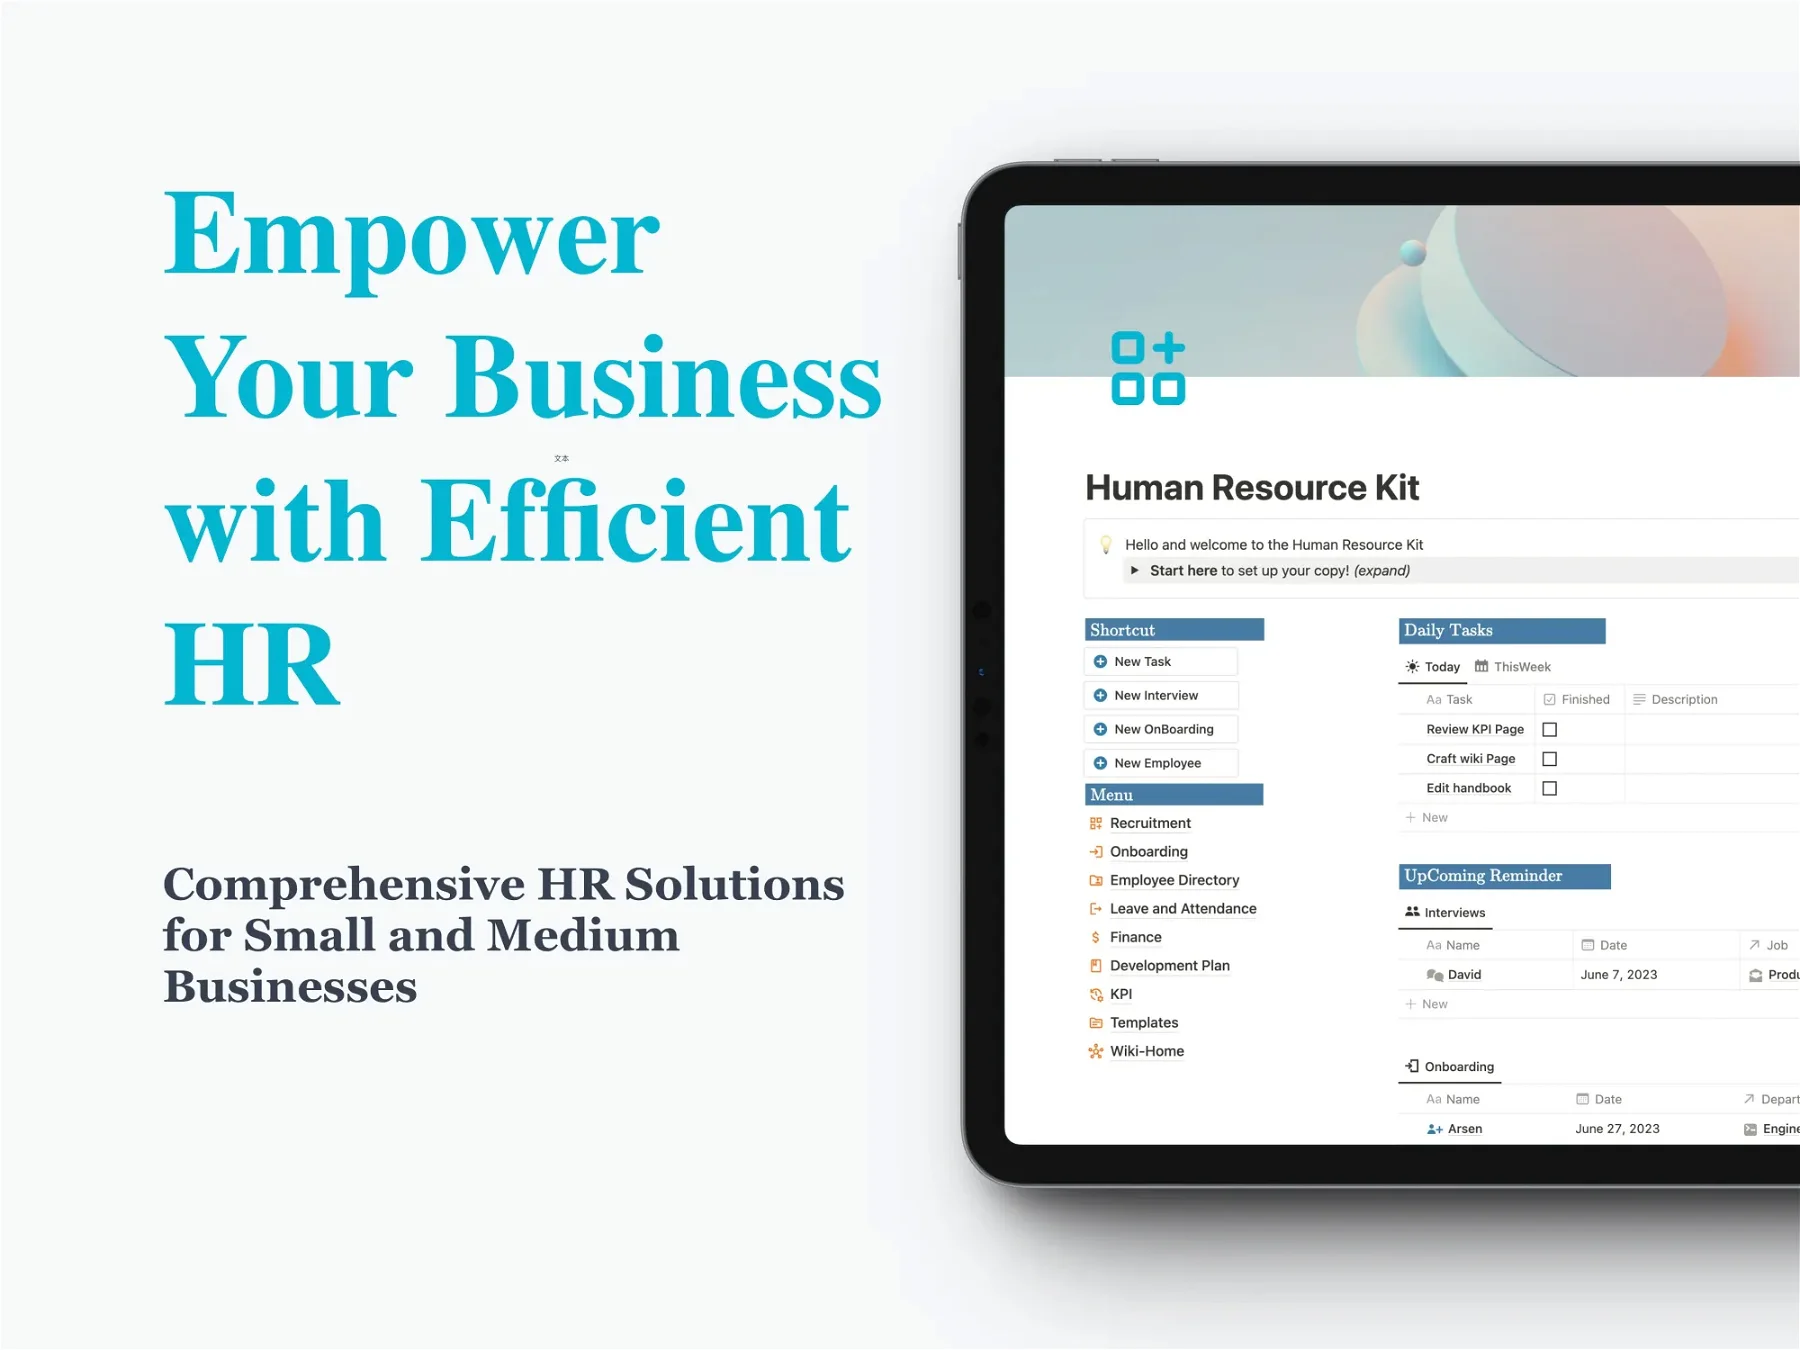 Streamline HR Operations with the All-in-One Human Resource Kit | Boost Productivity & Growth